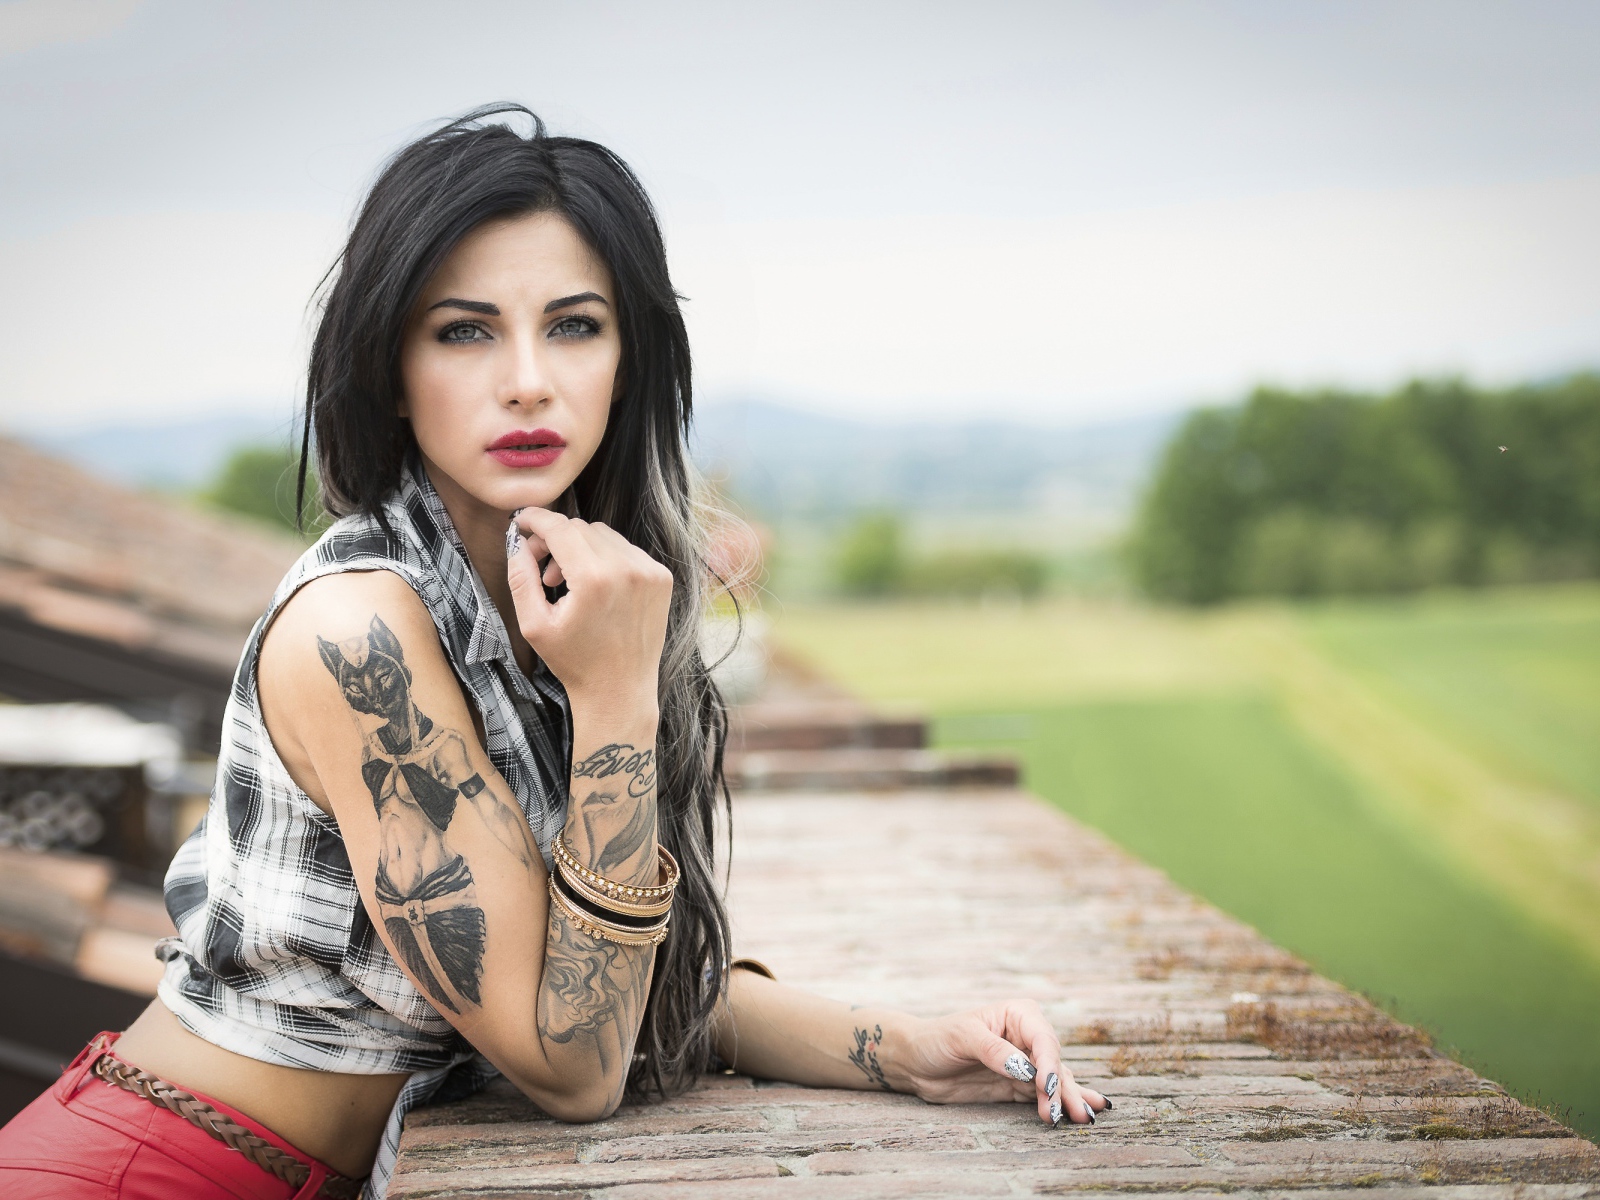 Young brunette girl with tattoos in her arms